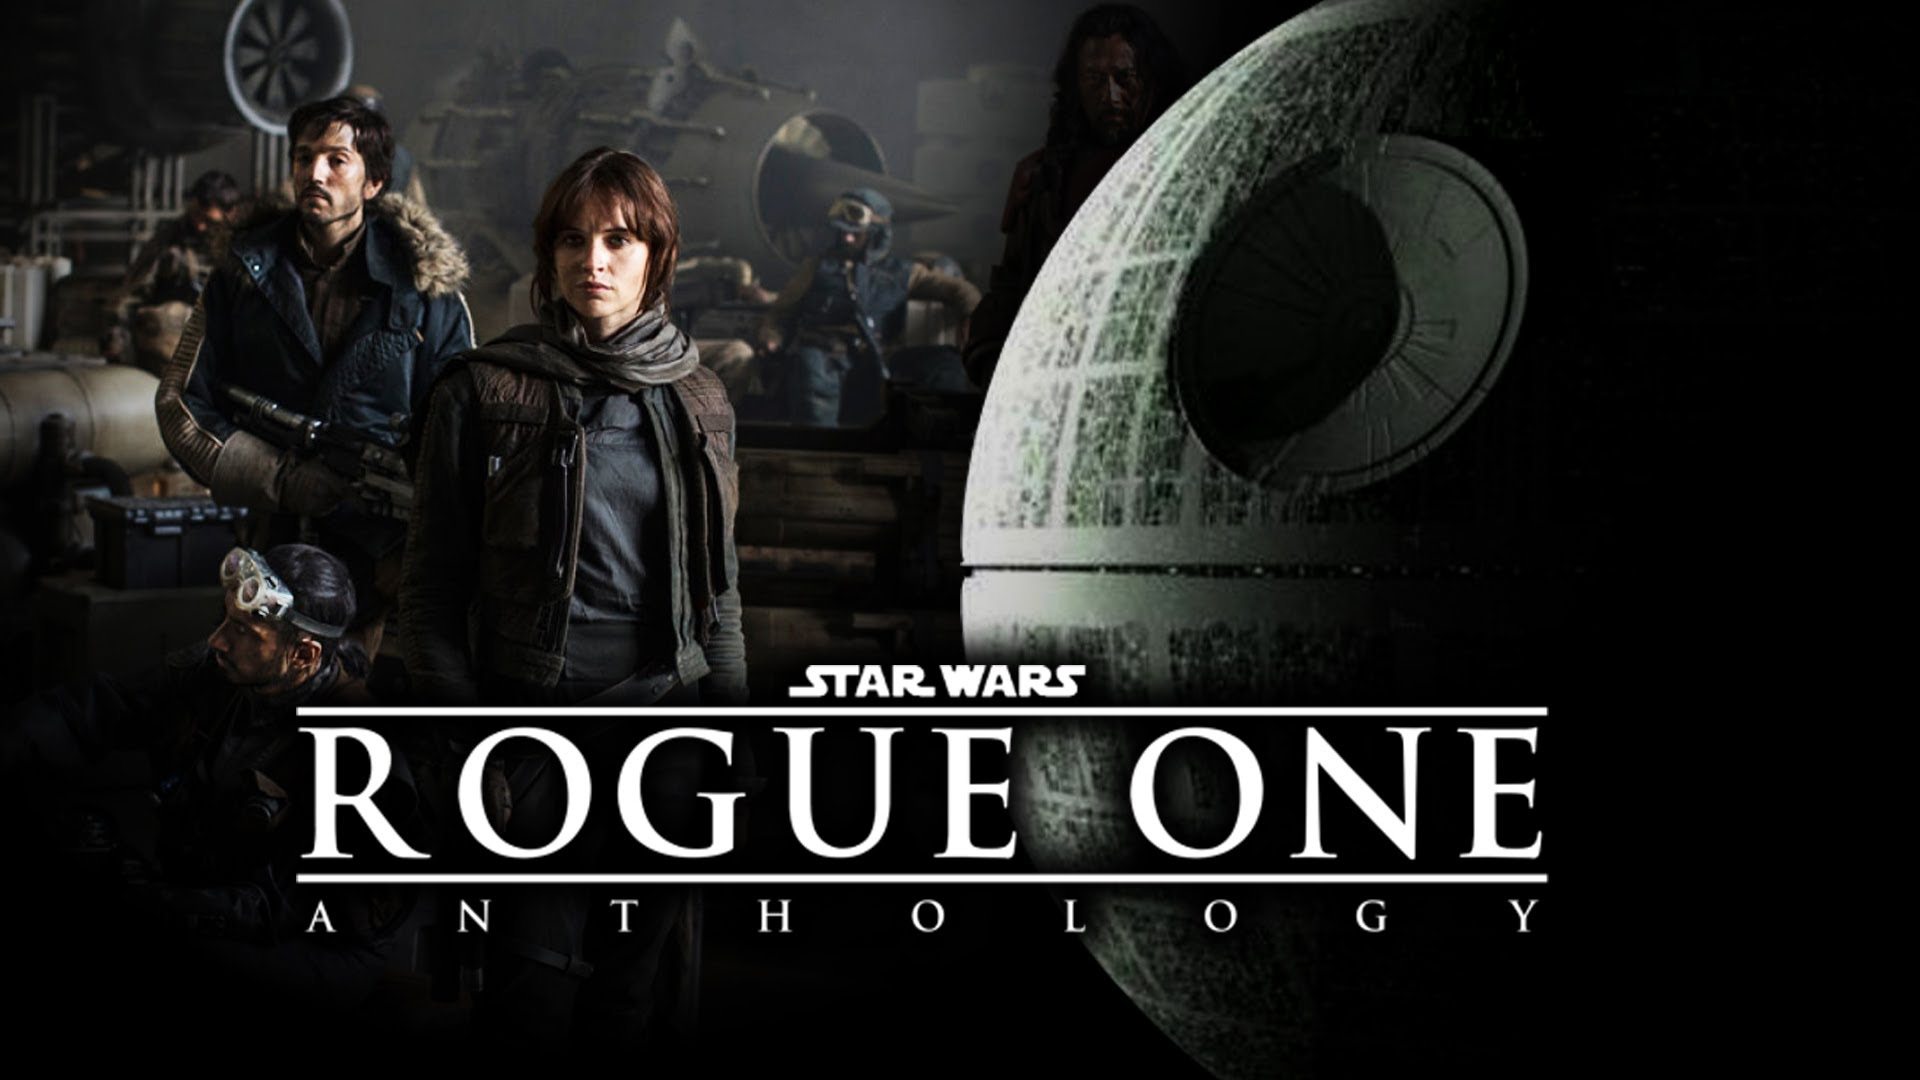 Wars Rogue One Wallpaper with Jyn Erso [1920 1080] HQ Backgrounds 1920x1080